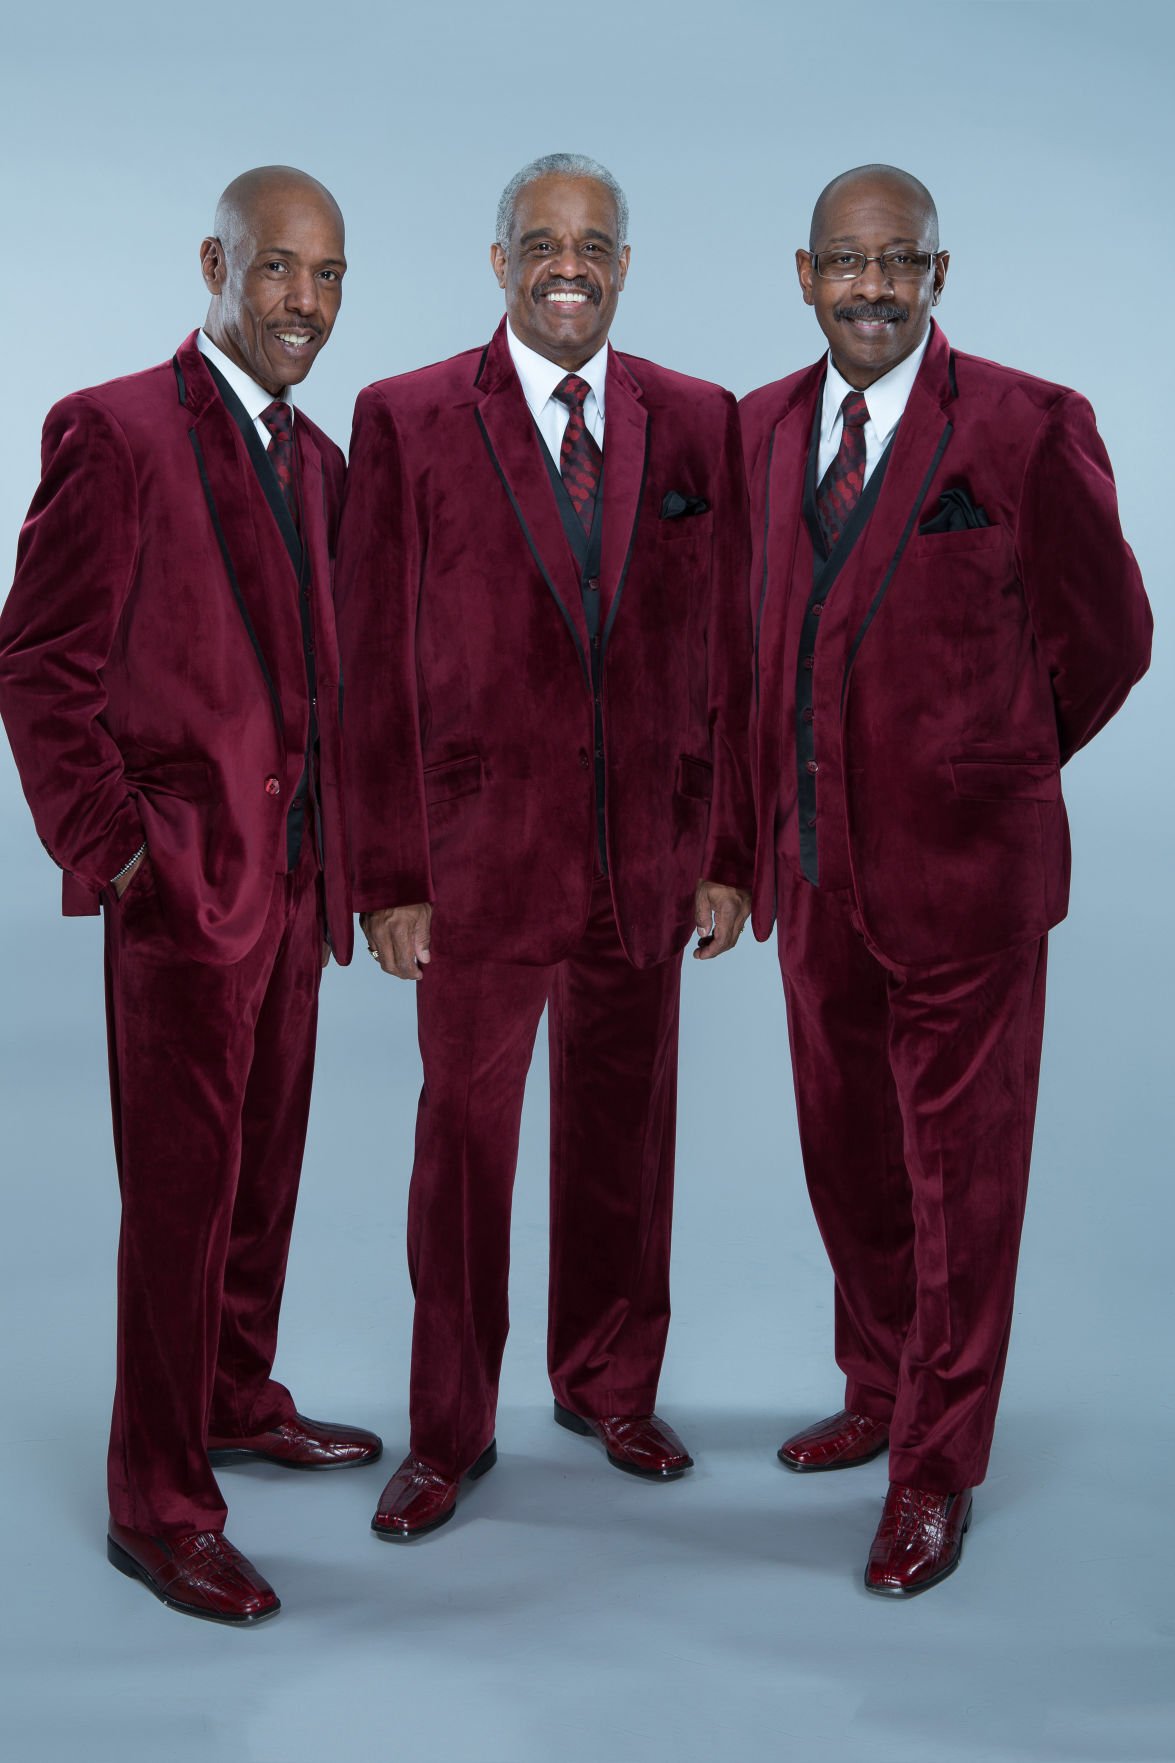 The Delfonics are a Philly group with international appeal | Music